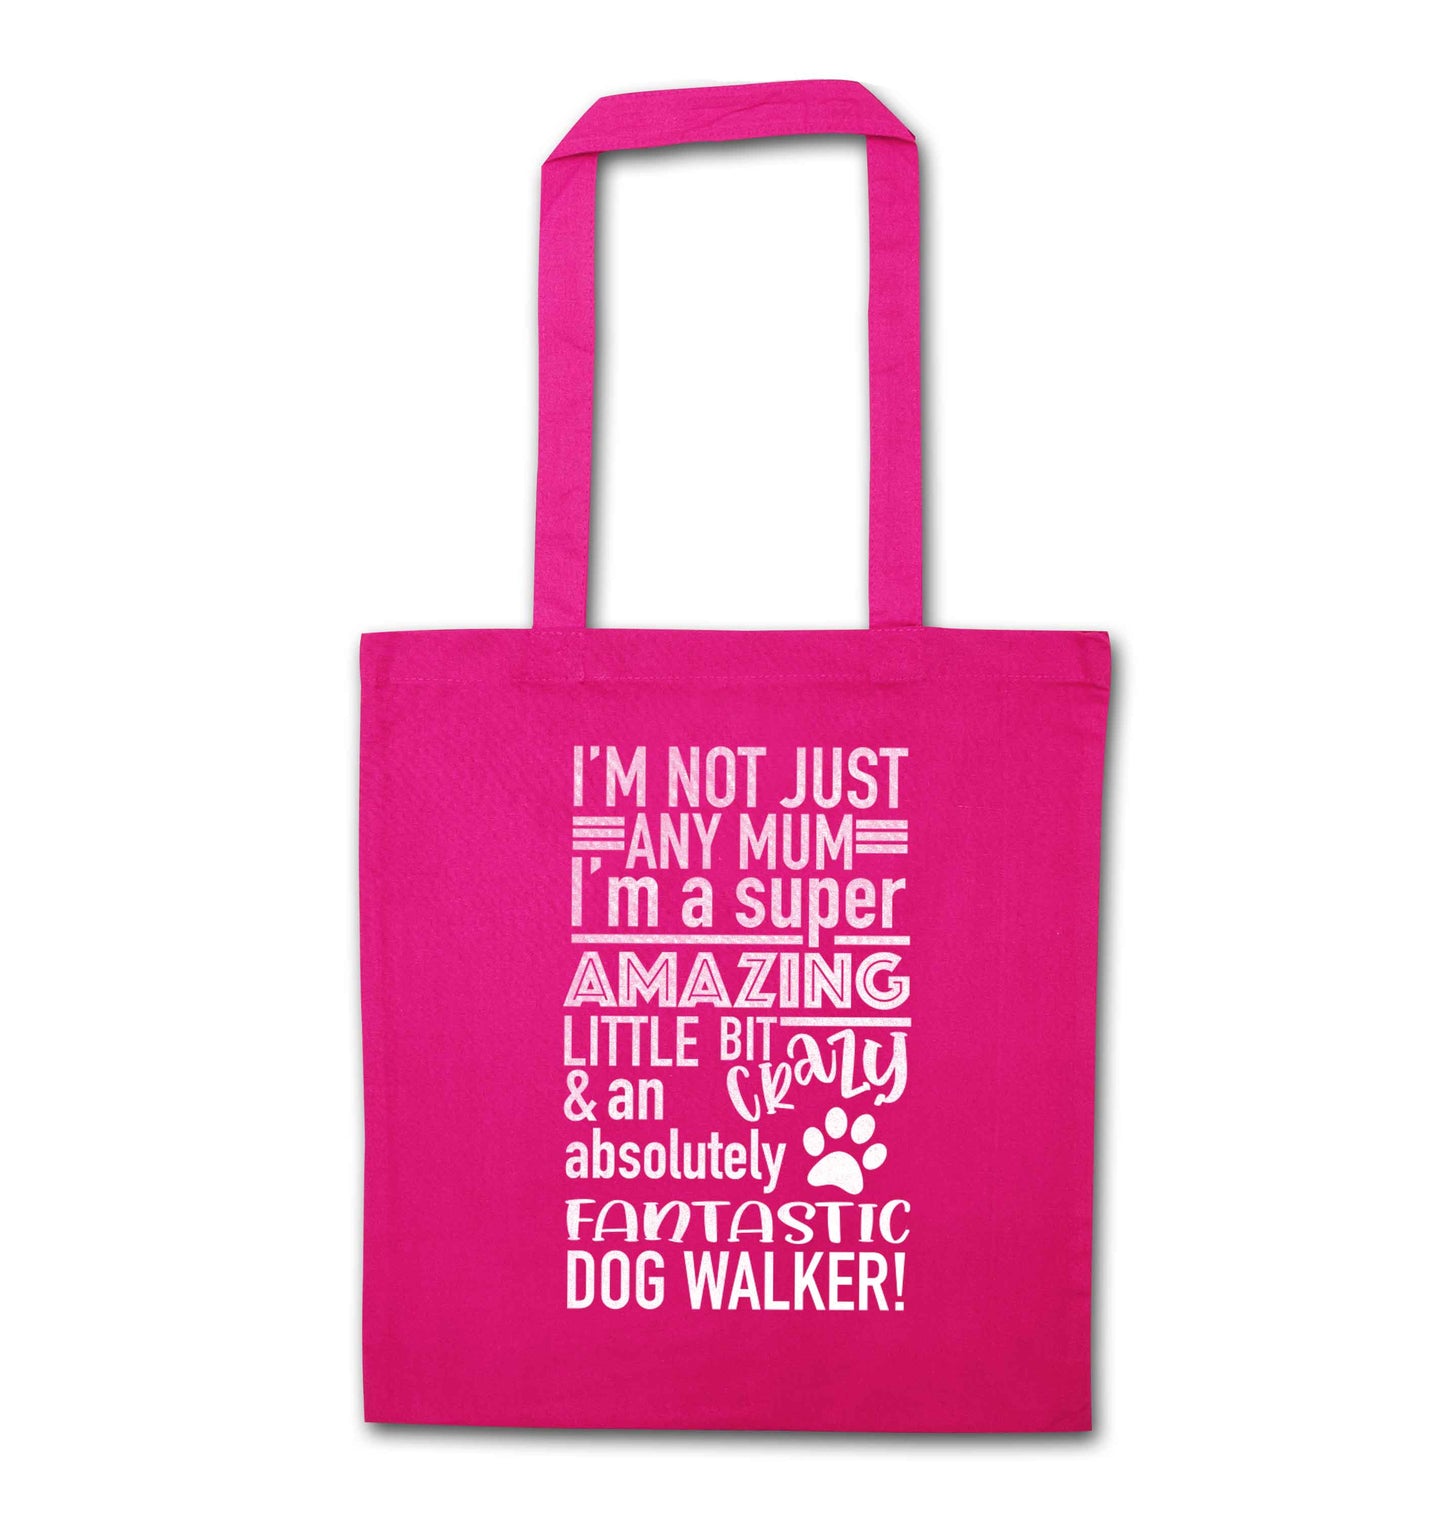 I'm not just any mum I'm a super amazing little bit crazy and an absolutely fantastic dog walker! pink tote bag